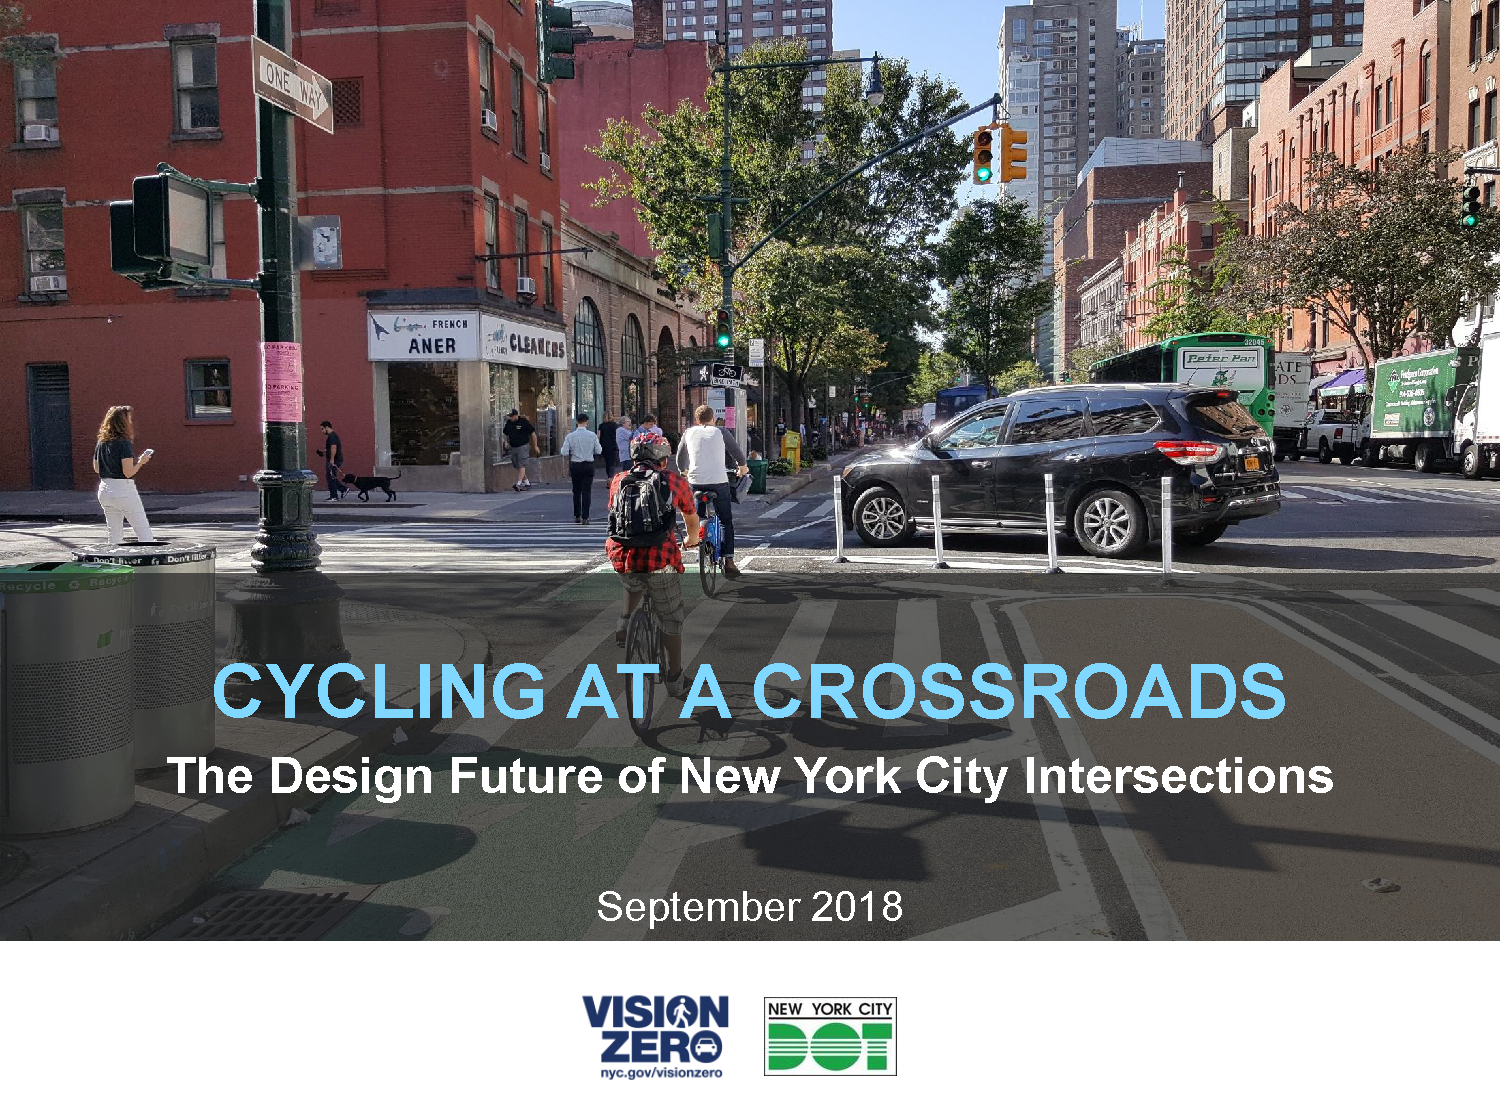 Cover slide for "Cycling at a crossroads" report. It shows two cyclists in a new style of intersection calle d"offset crossings". 